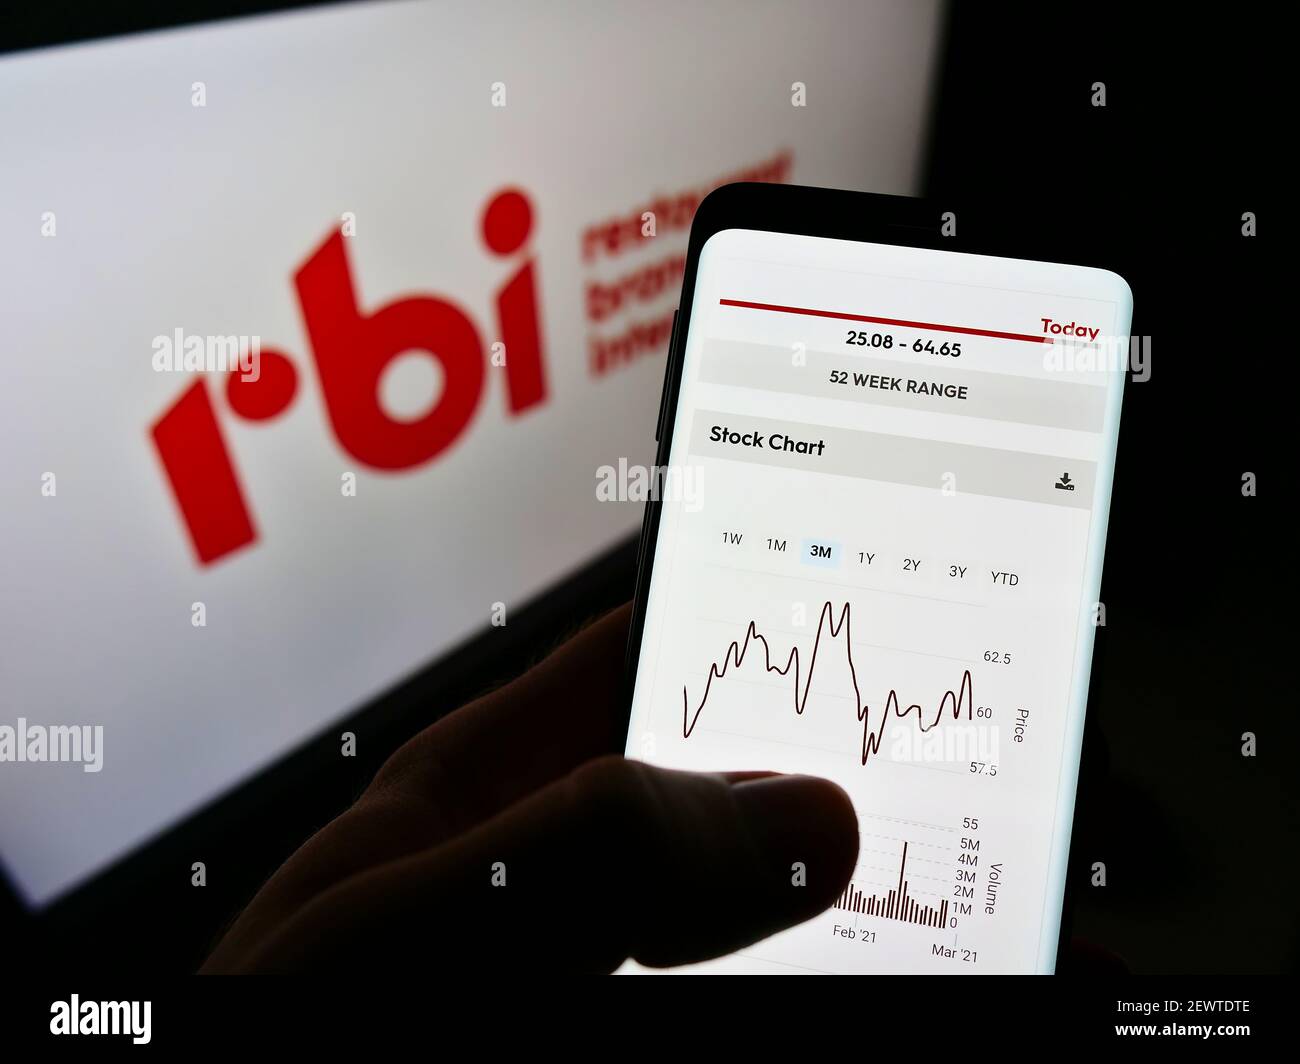 Person holding cellphone with website and stock chart of company Restaurant Brands International (RBI) on screen with logo. Focus on phone display. Stock Photo